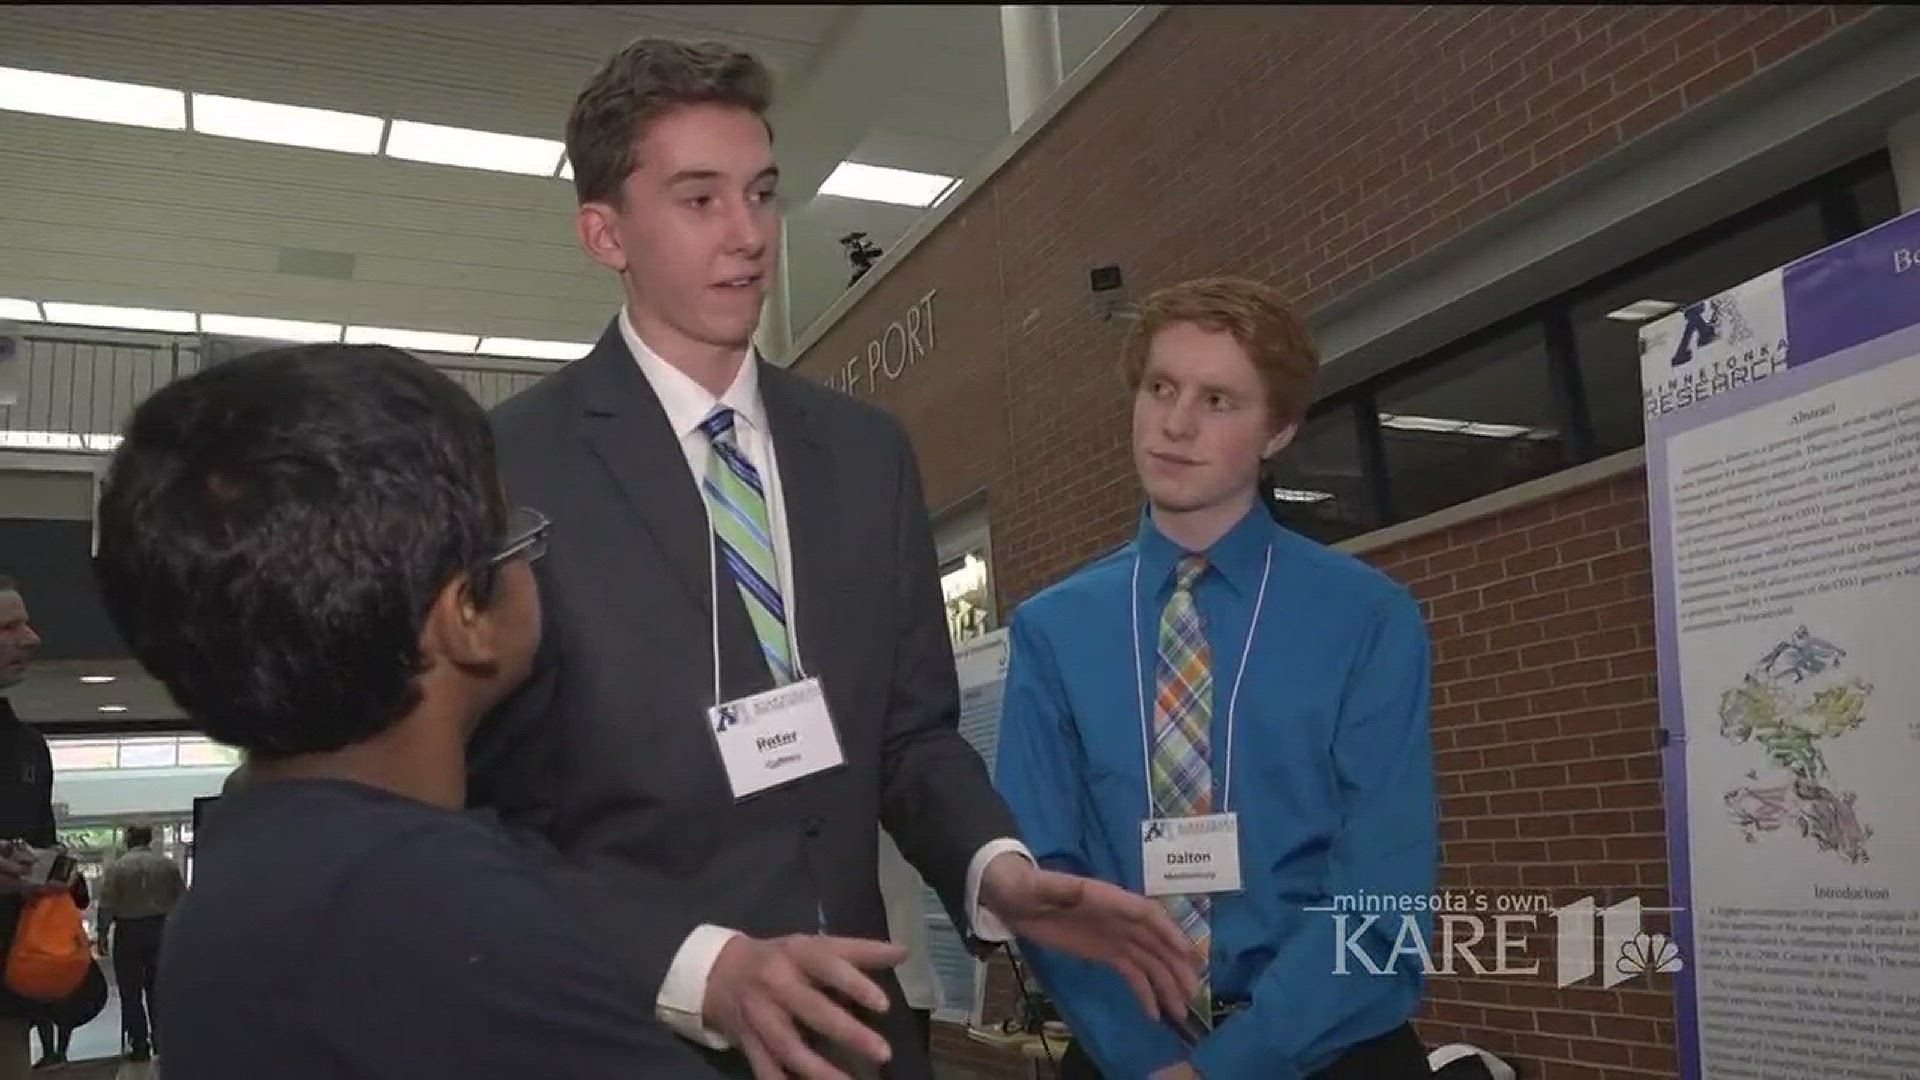 Minnetonka High School's first ever Research Symposium was a great success with more than 40 students presenting their research to their peers.